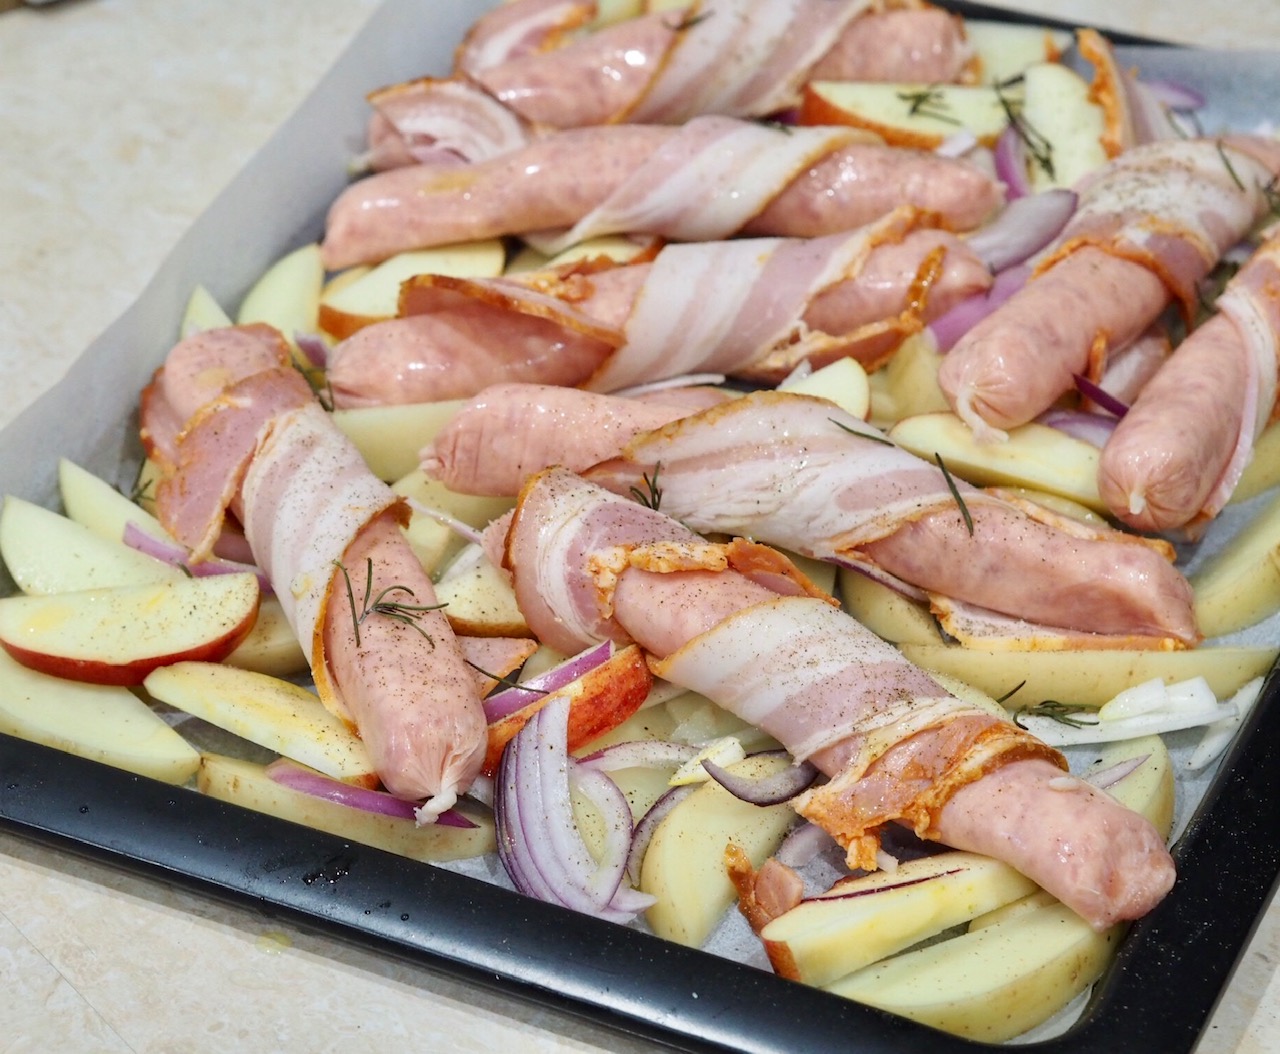 Tray Bake: Bacon Wrapped Sausages